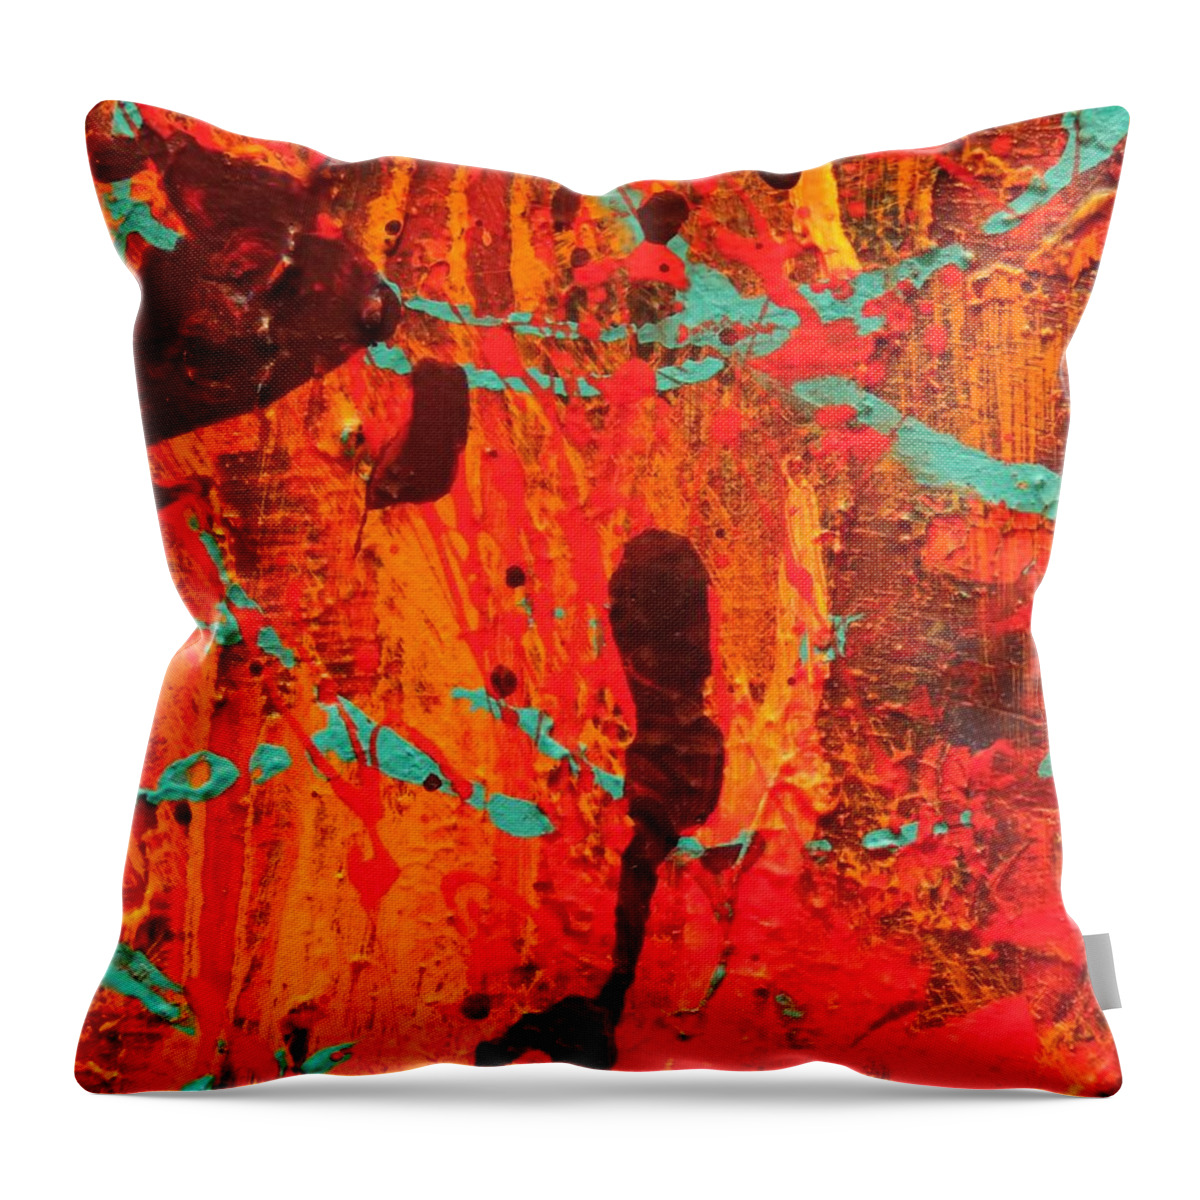 Color Festiva Throw Pillow featuring the painting Color Festiva by Bill Tomsa